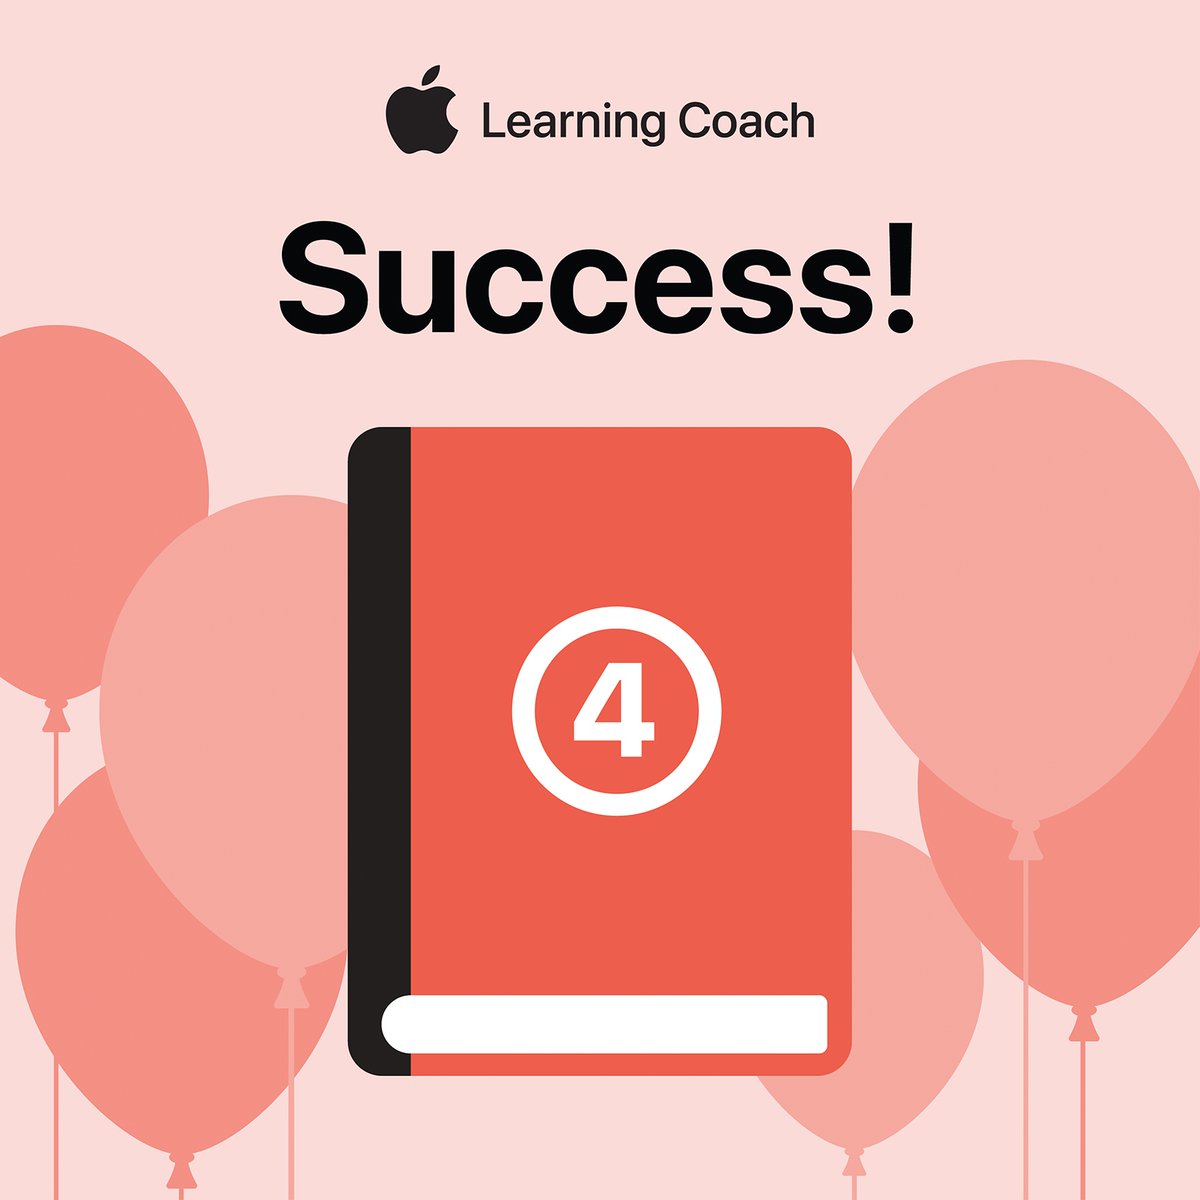 Unit 4 of 6 for Apple Learning Coach completed! Today was long and challenging, but great. I am really getting so much out of the program. #AppleLearningCoach #Apple #BPSD #BPSDInnovators #InnovationVanguard #OCCUE